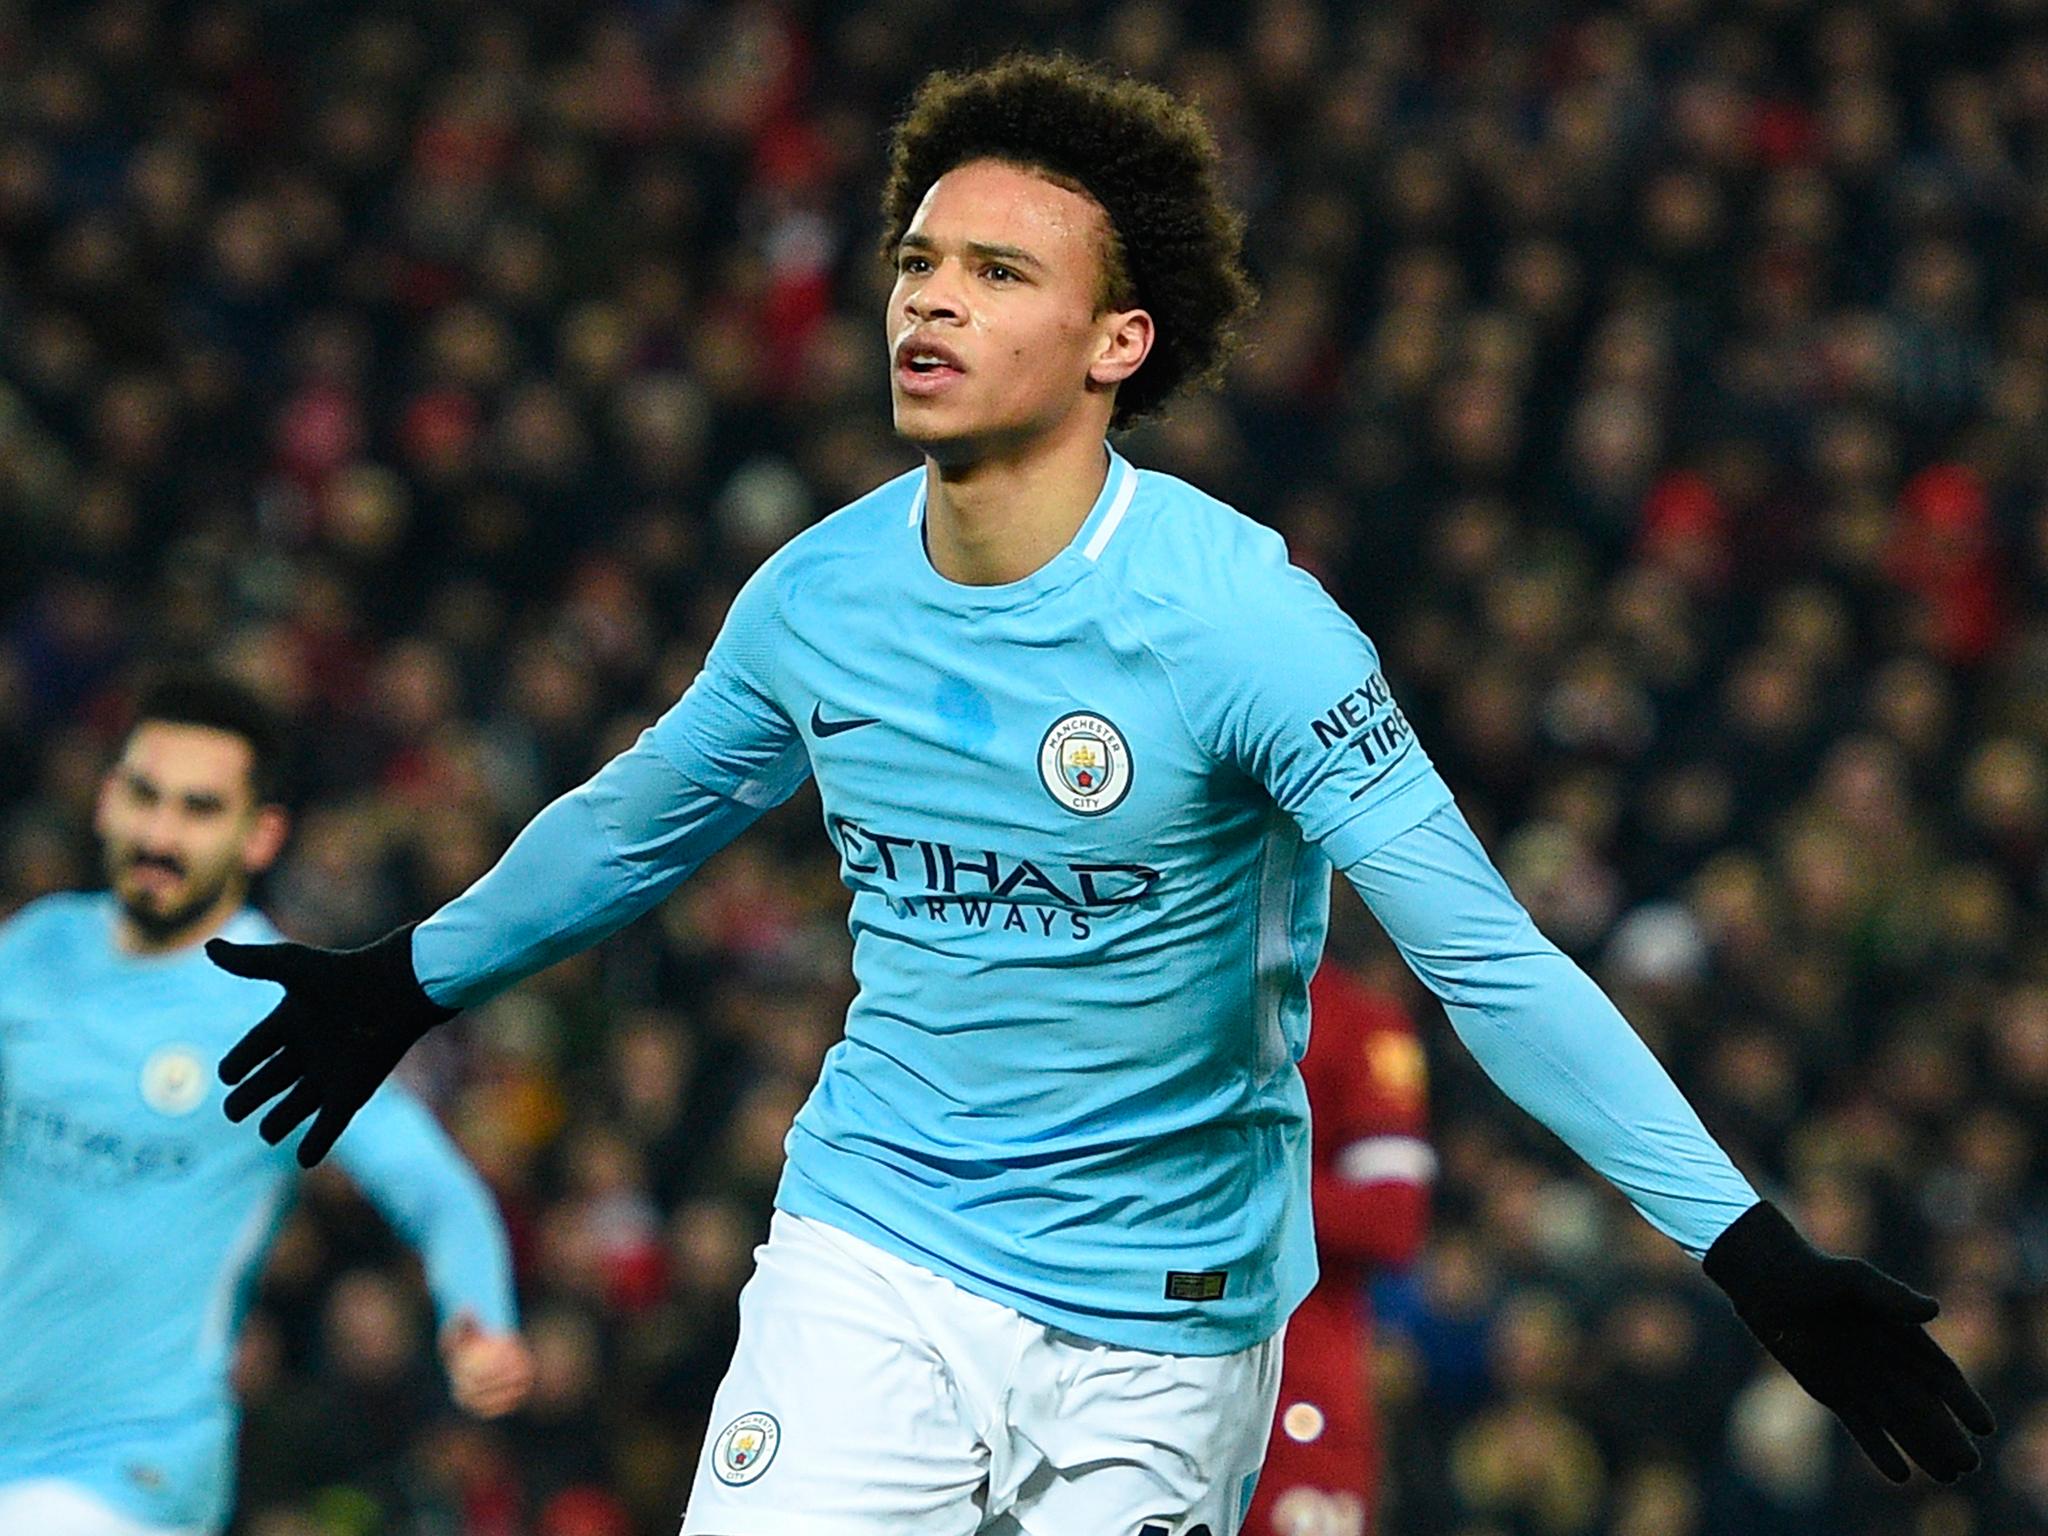 Leroy Sane got City back on level terms but it was all too brief